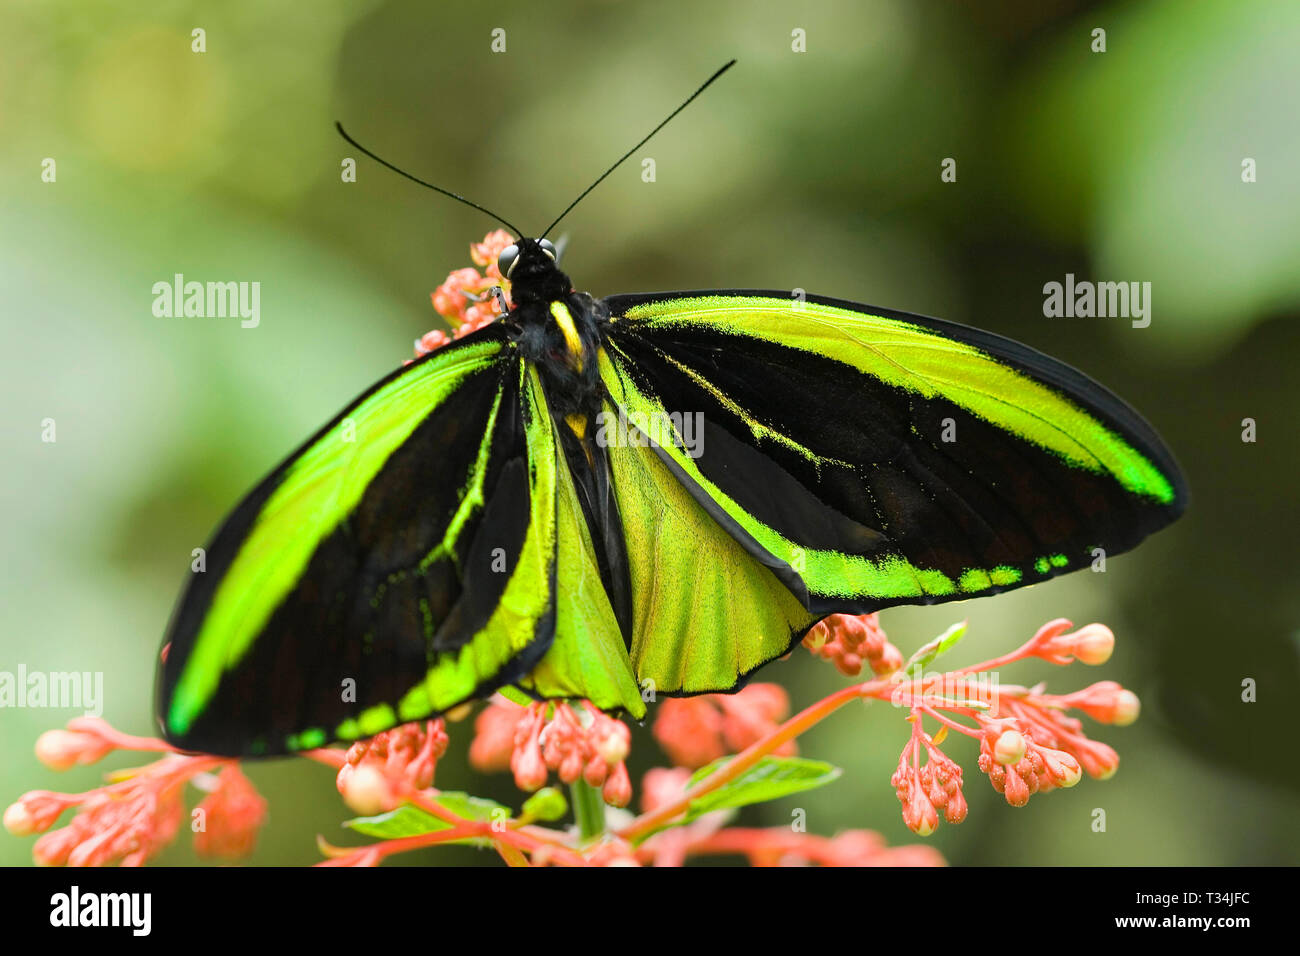 Butterfly on a flower, Indonesia Stock Photo